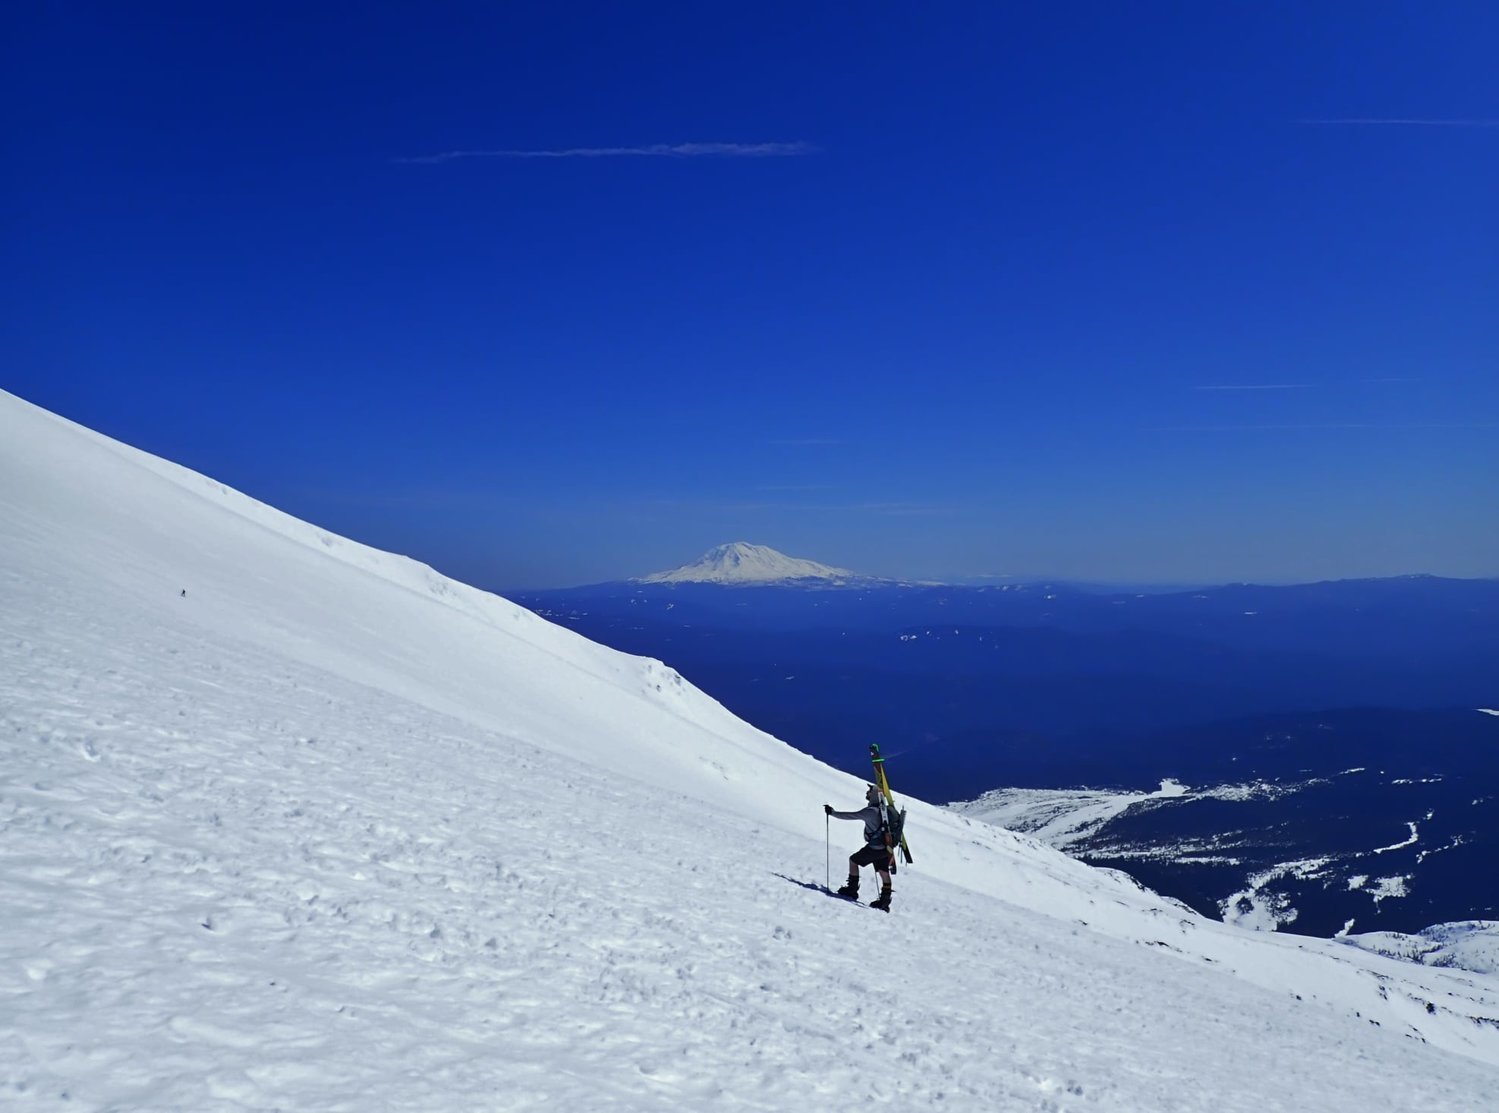 Mount Adams is seen in the background as a climber moves up the slopes of Mount St. Helens en route to the summit on March 31.